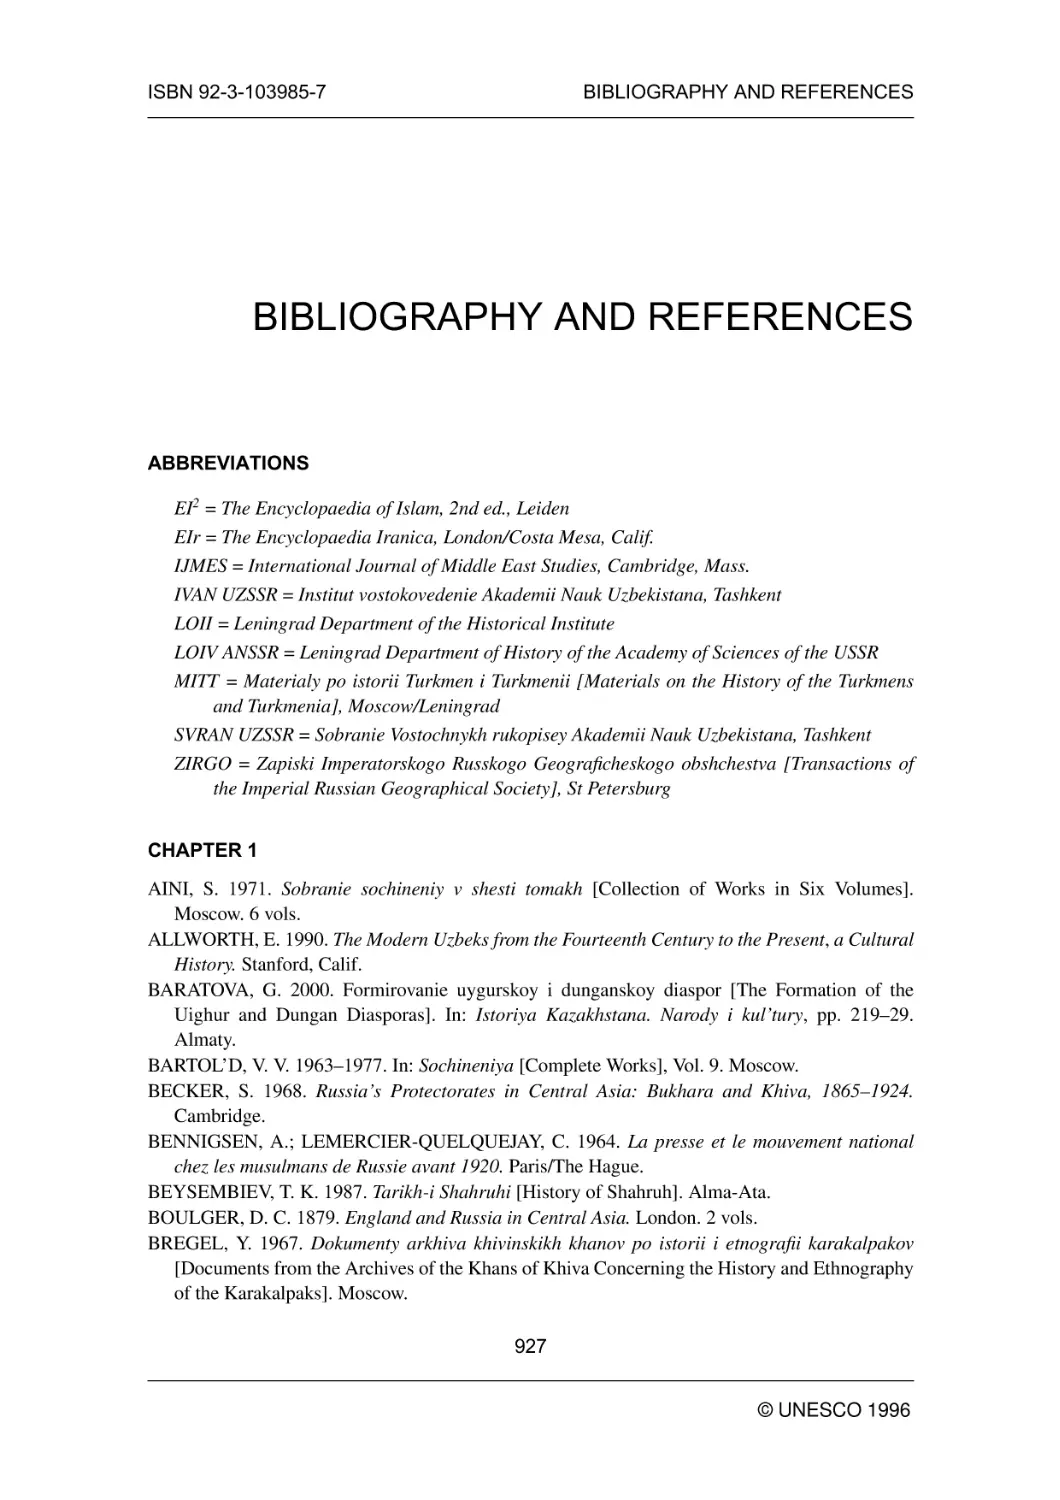 BIBLIOGRAPHY AND REFERENCES